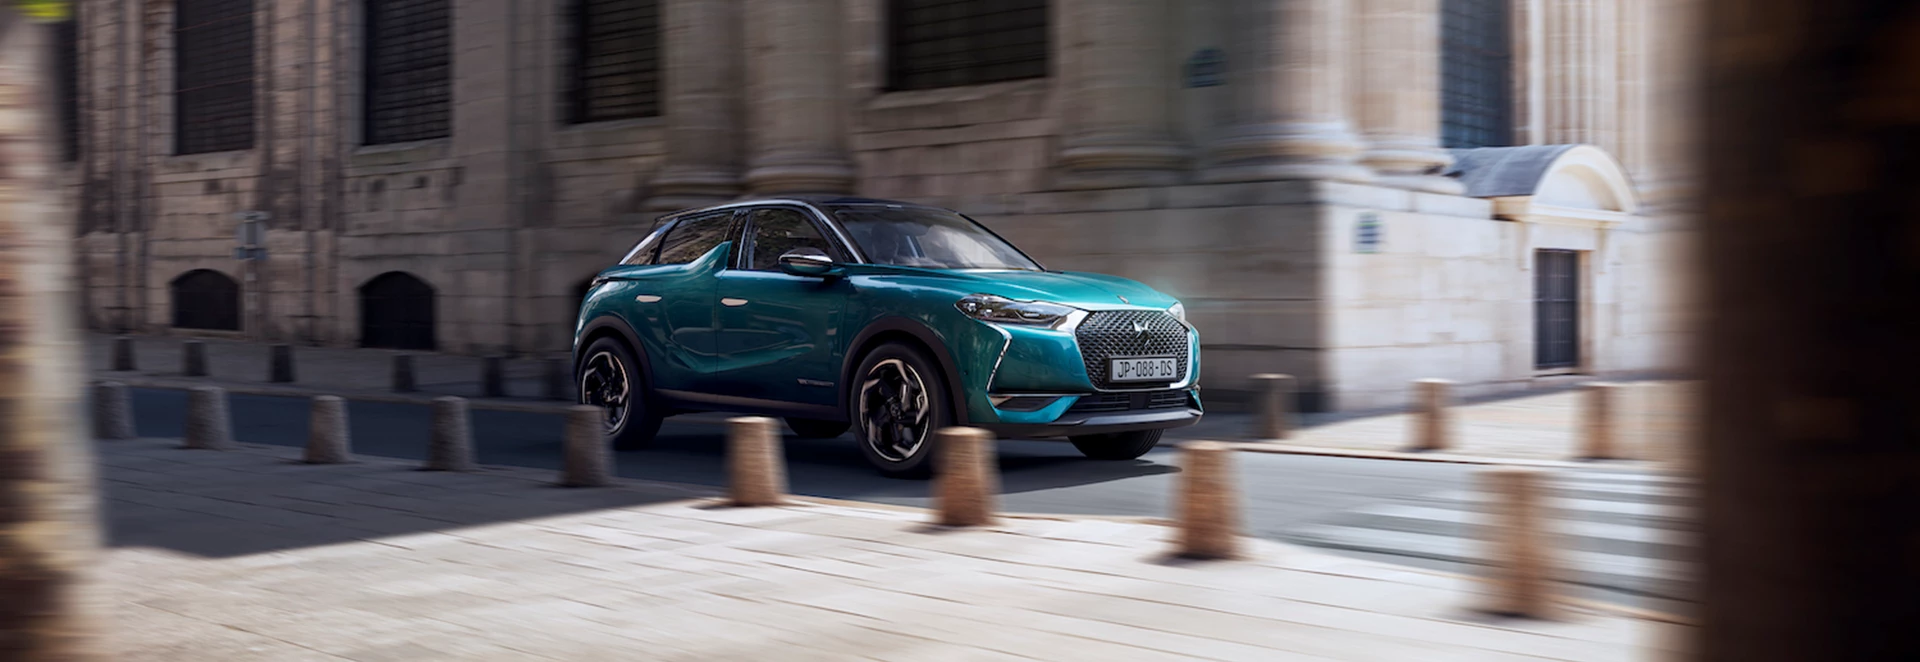 DS 3 Crossback: full spec and pricing revealed 